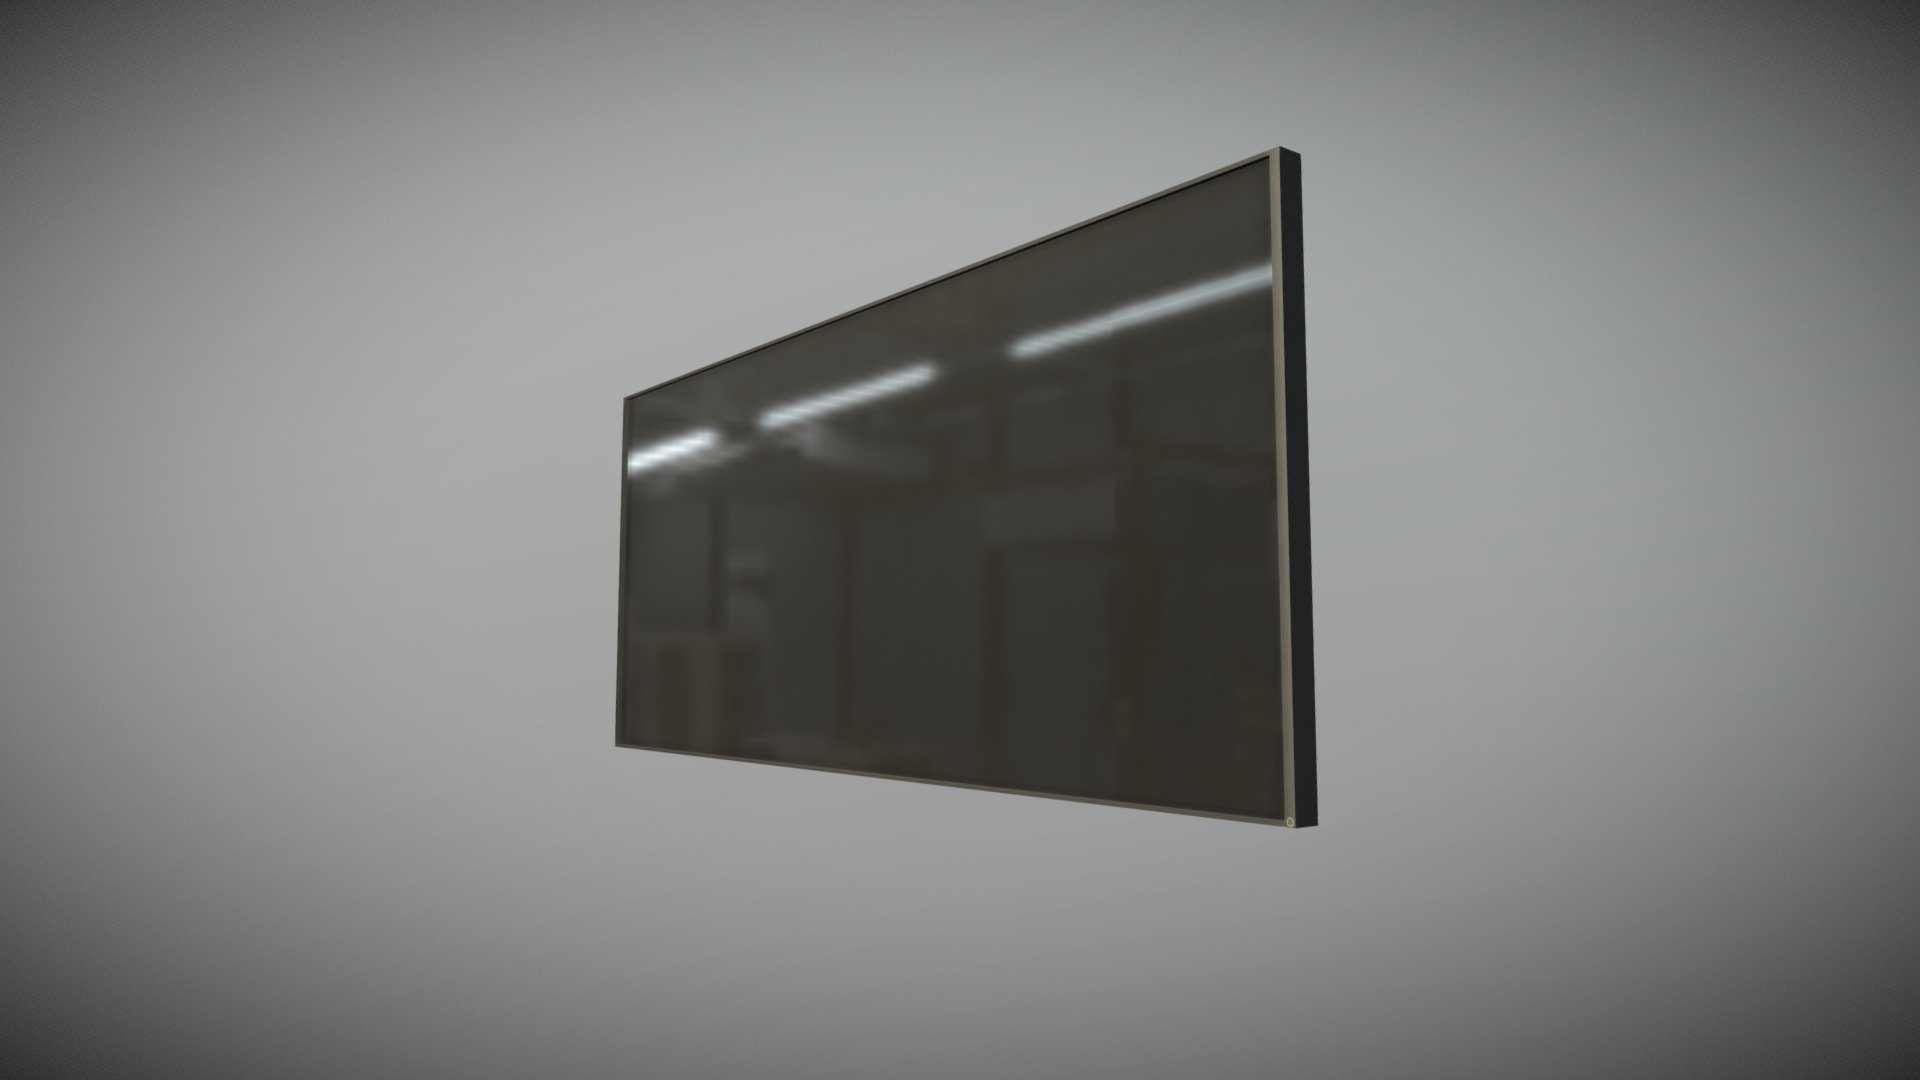 Flatscreen TV with - Black with Green Backlight